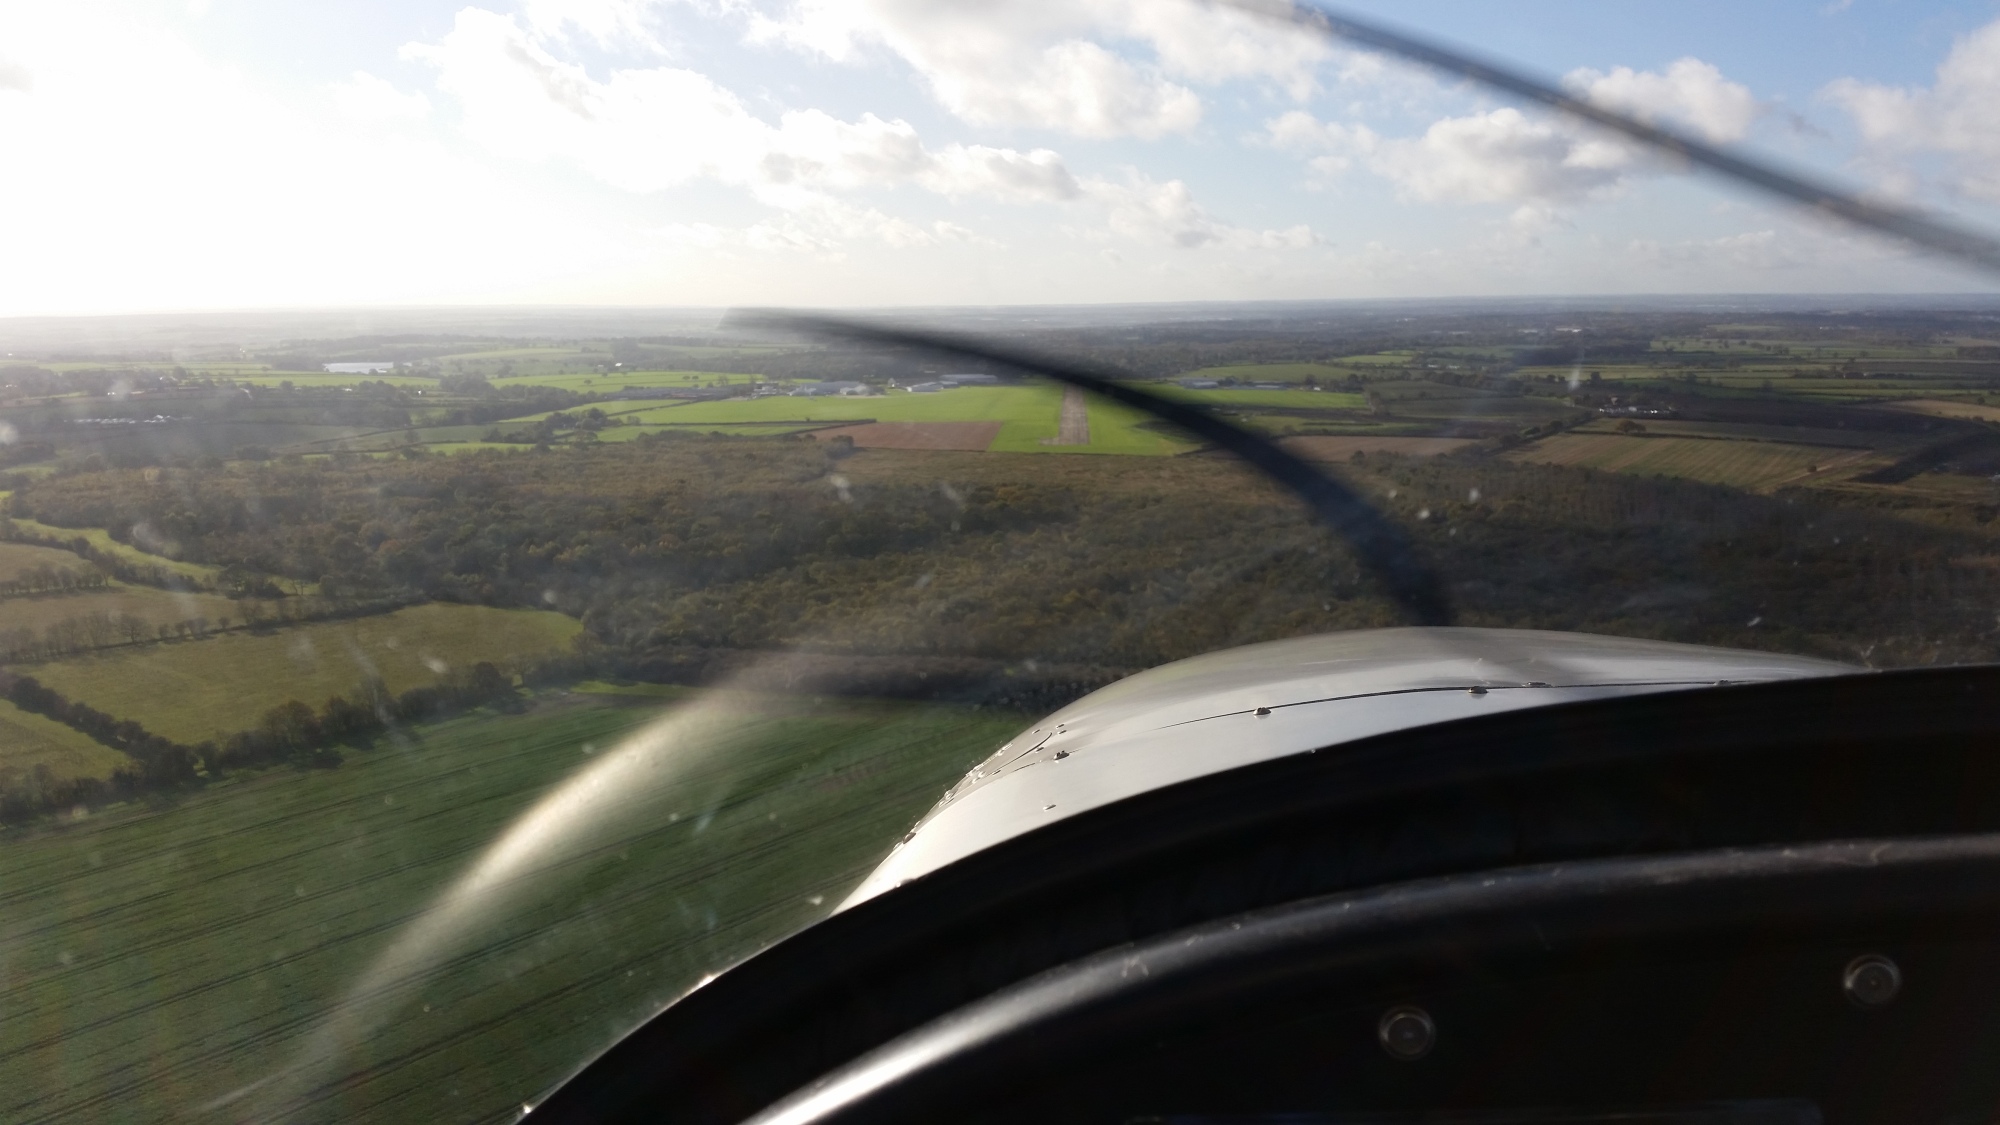 Coming in to land in a microlight